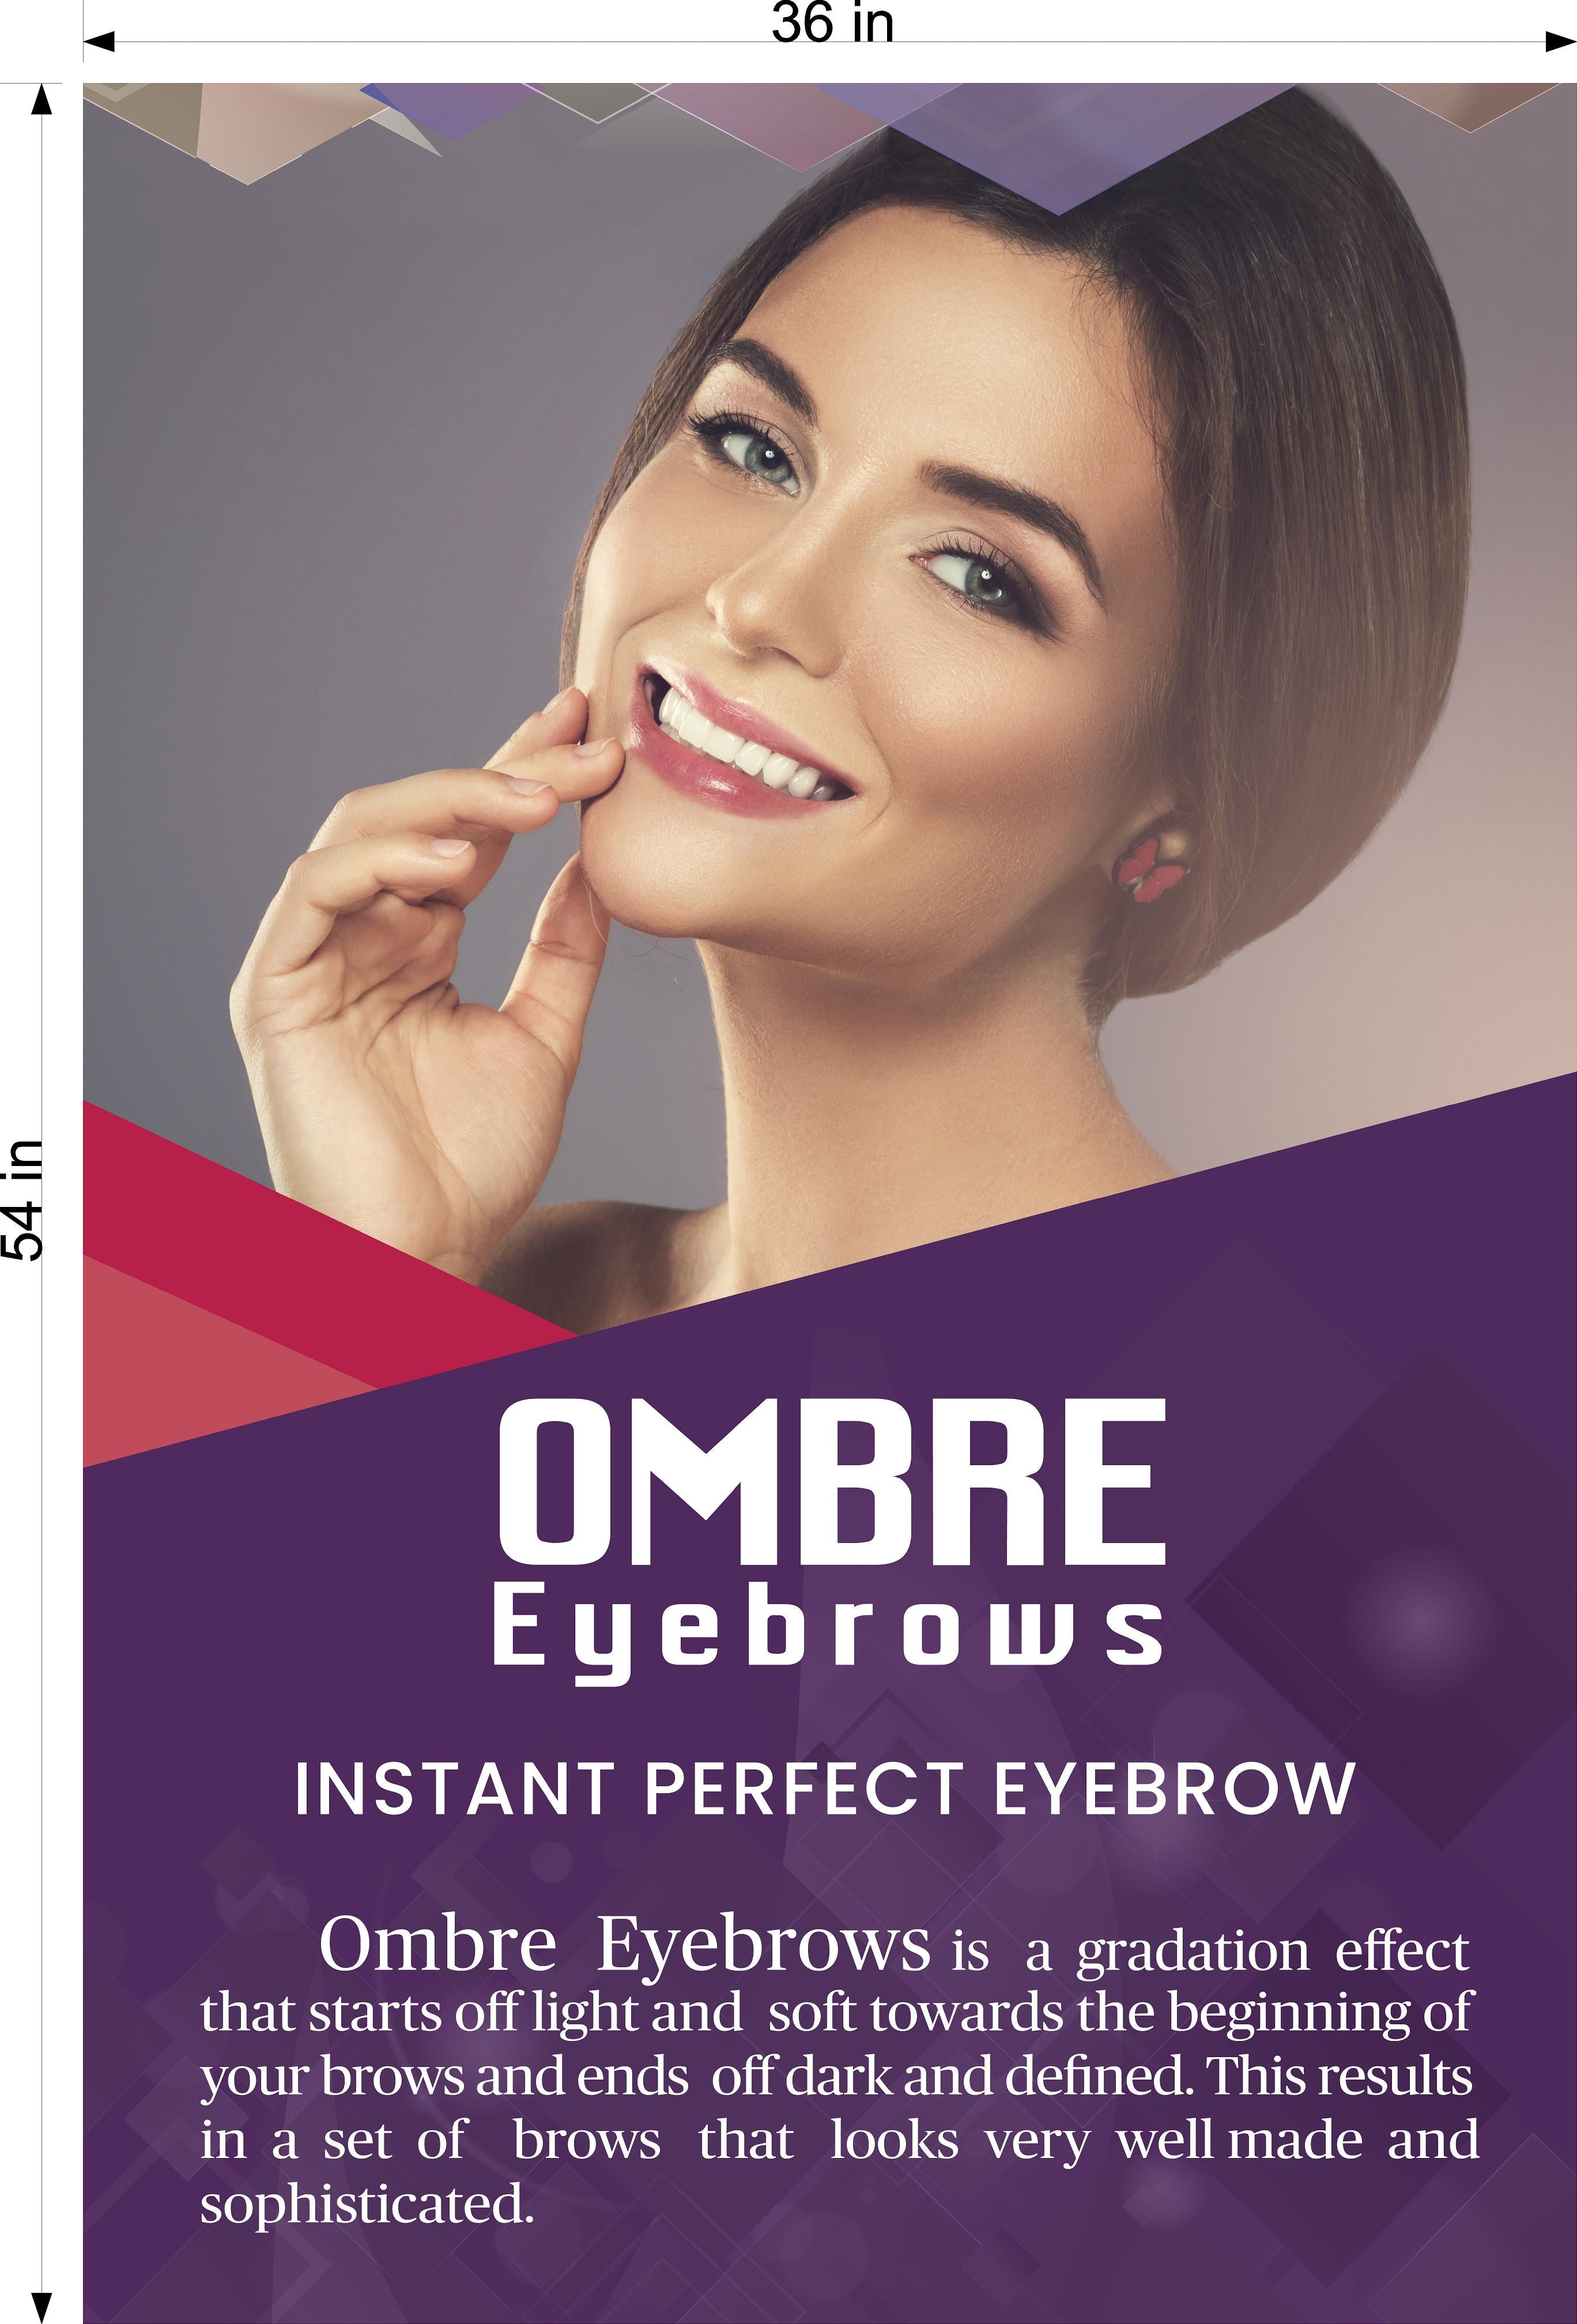 Ombre Eyebrows 04 Perforated Mesh One Way Vision See-Through Window Vinyl Salon Sign Powdered Brows Semi-permanent Vertical